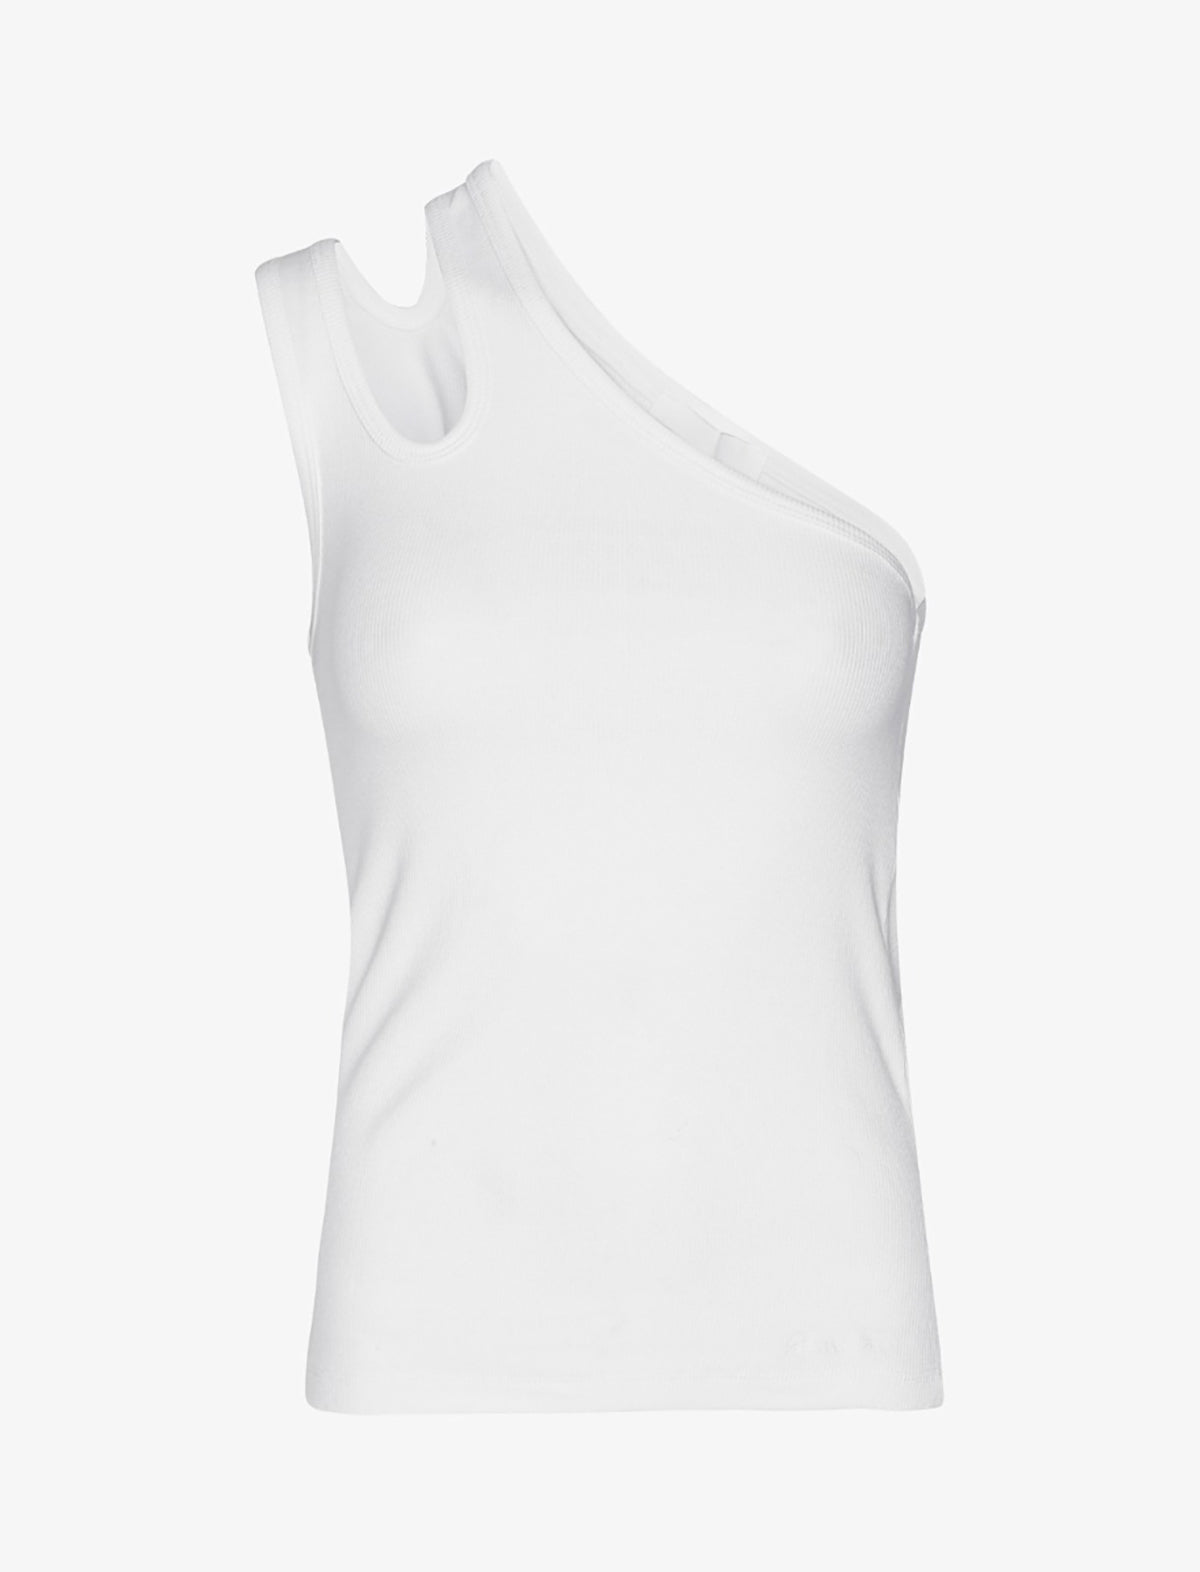 REMAIN Jersey One-Shoulder Top in Bright White